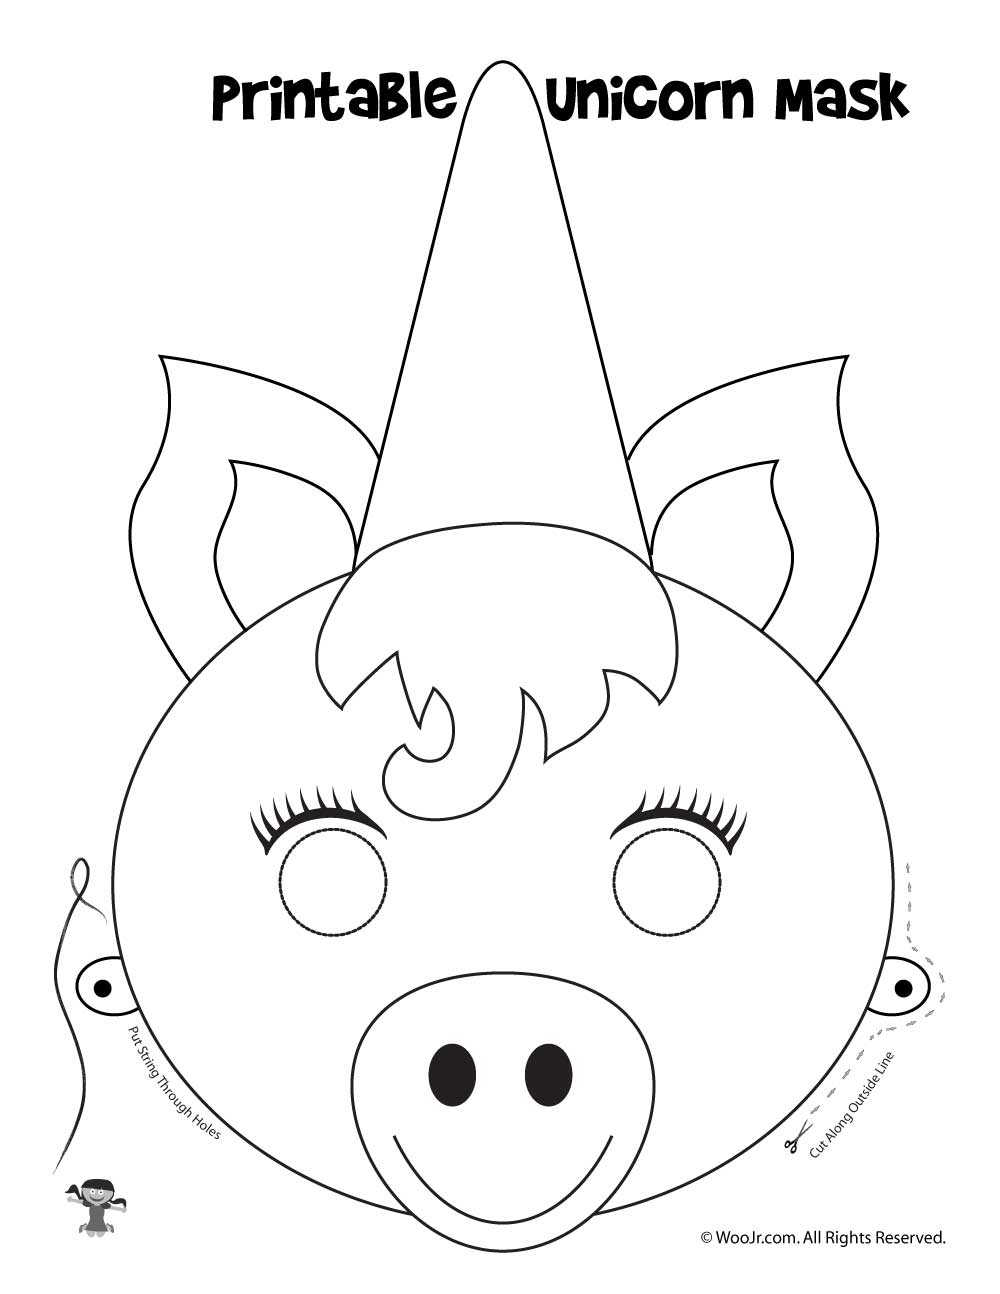 10 Awesome Unicorn Mask Templates Kitty Baby Love